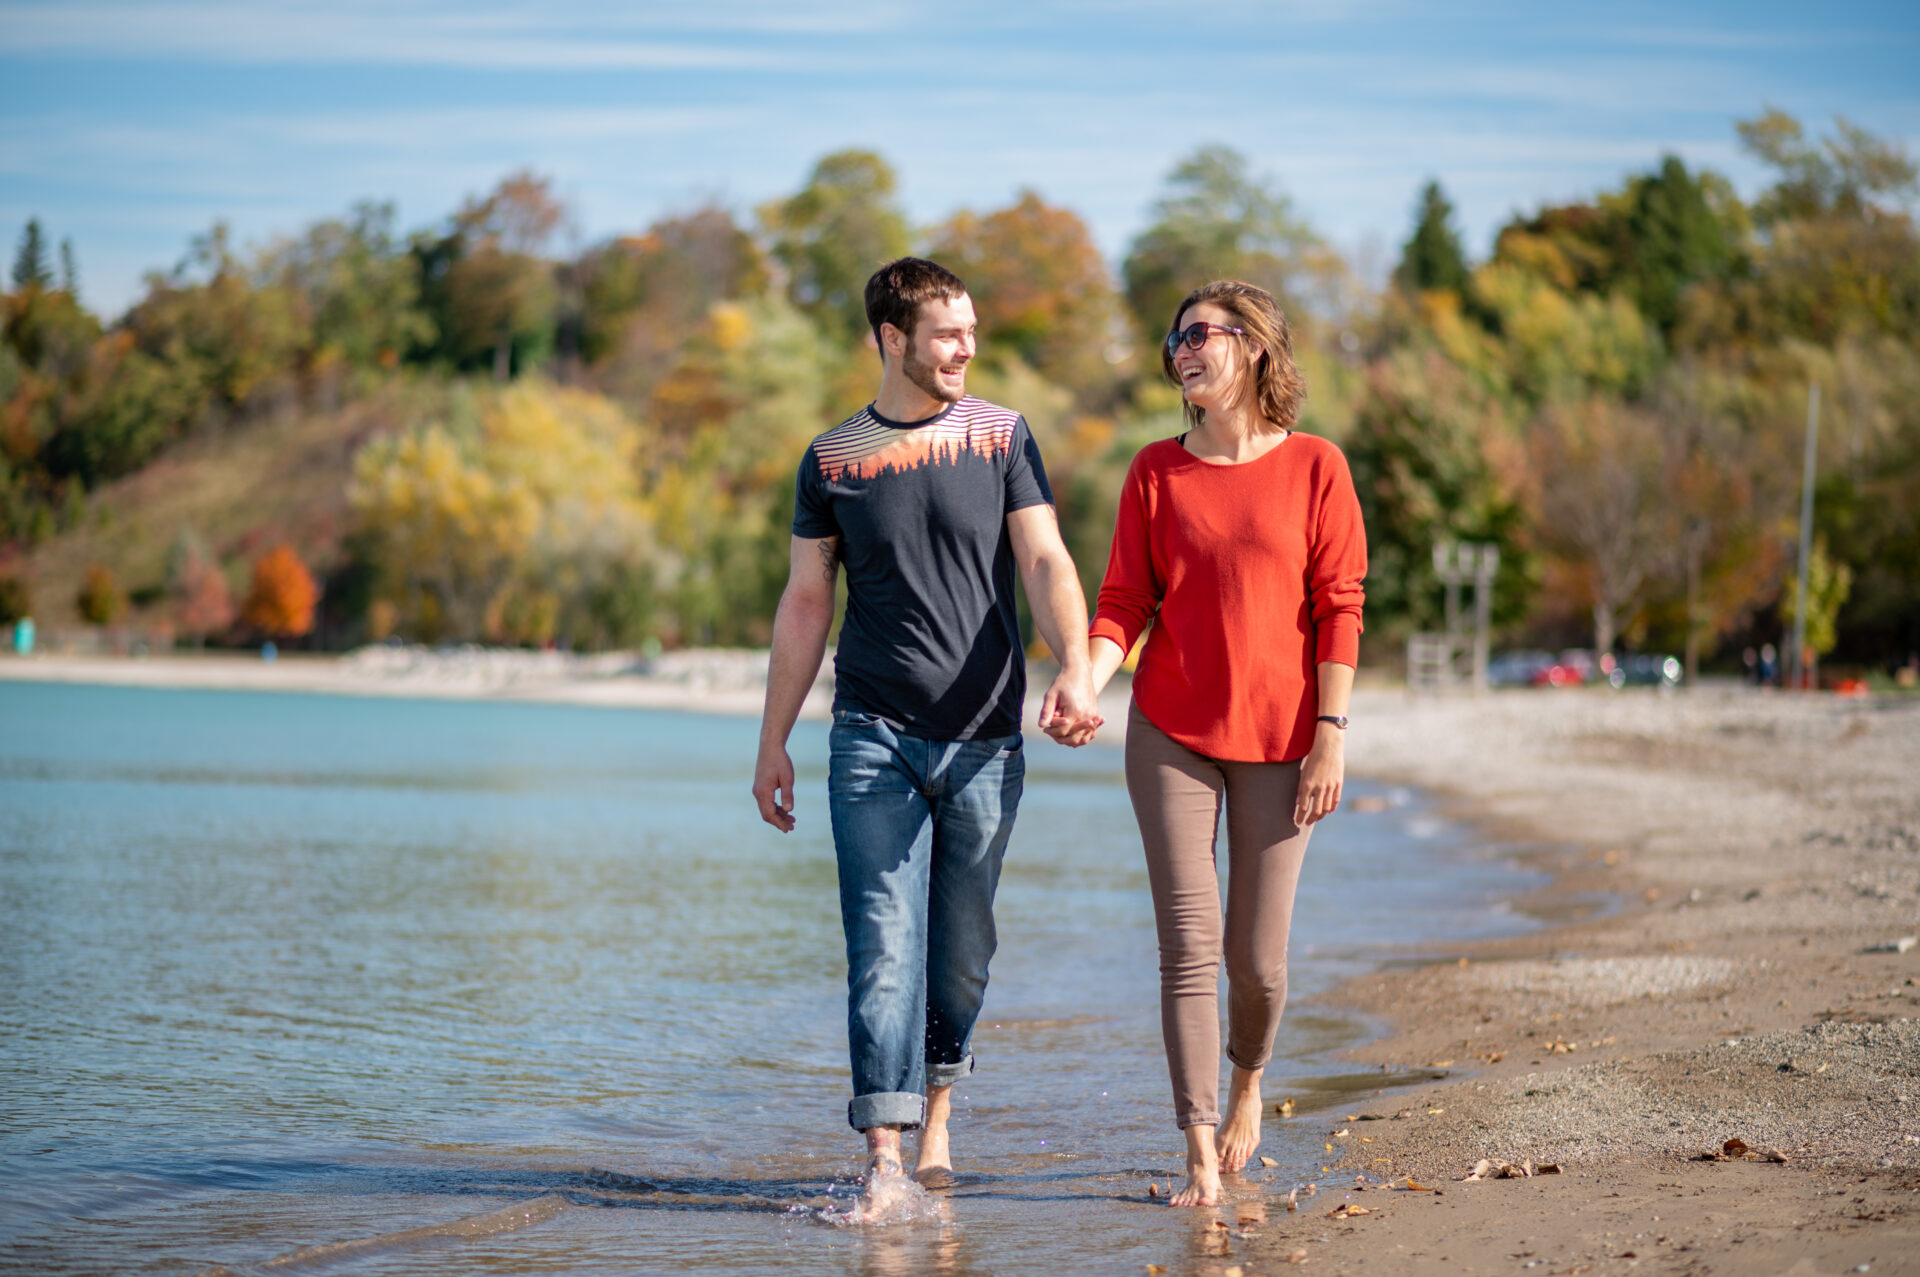 Man and woman walking along the beach holding hands